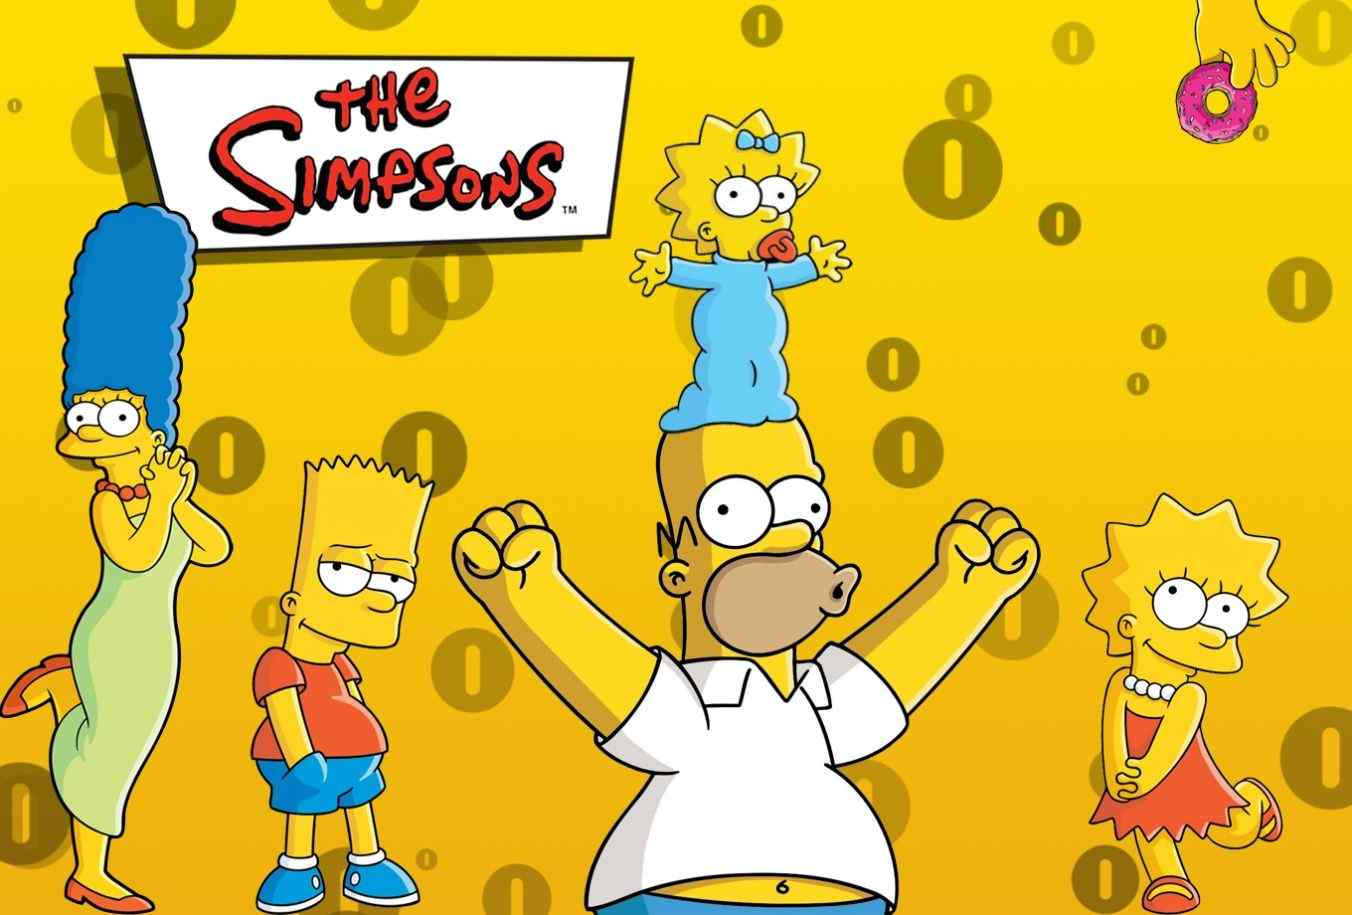 15102 The Simpsons Marge Simpson Bart Simpson Maggie Simpson Homer Simpson Lisa Simpson